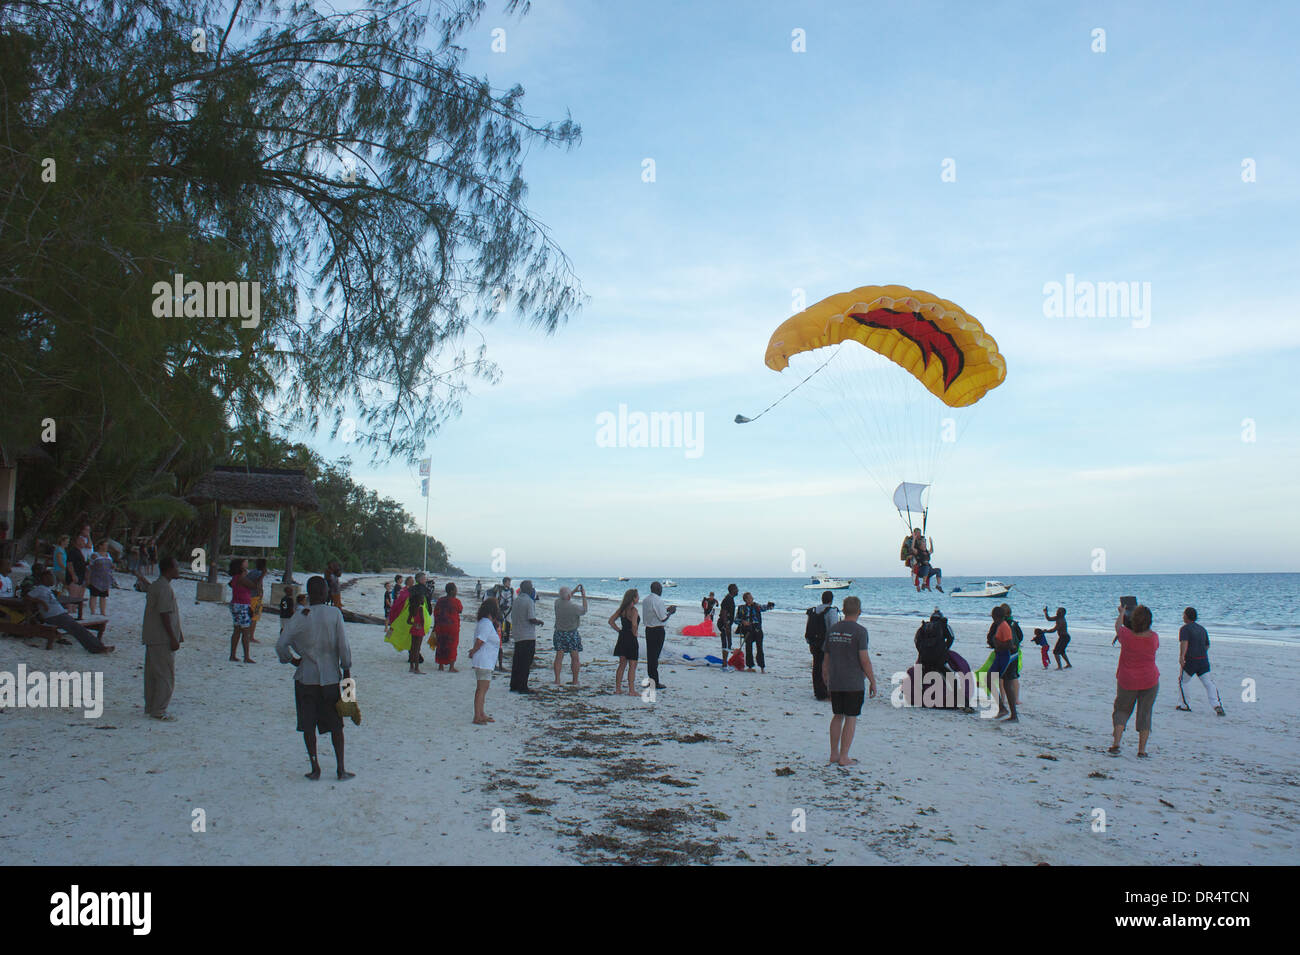 Tourists look on as a tandem skydive parachute lands on the beach outside 40 Thieves bar, Diani Beach. Kenya Stock Photo